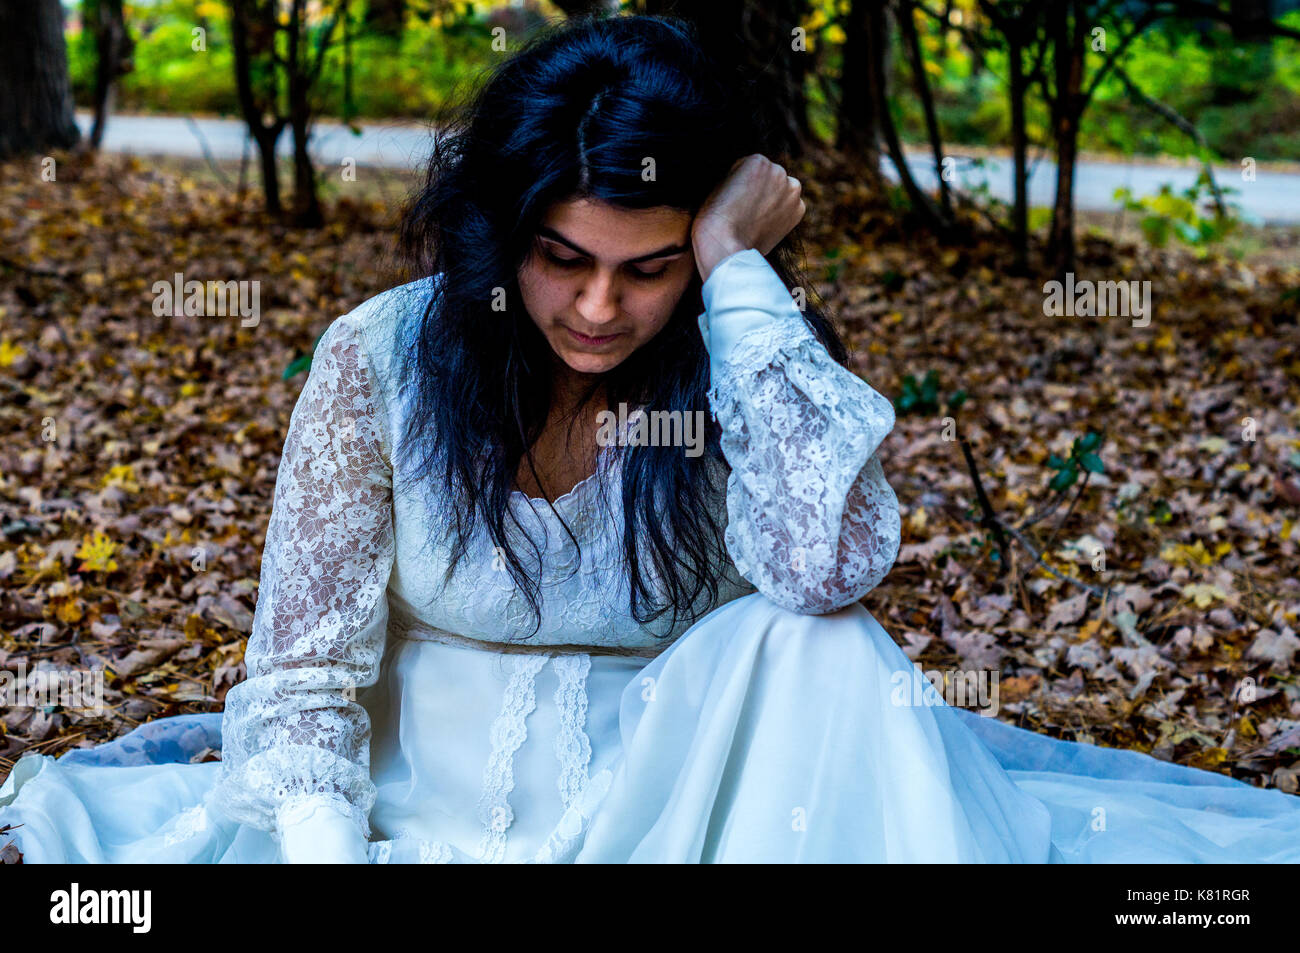 Young teen girl in dress laying on the ground outside looking down Stock Photo